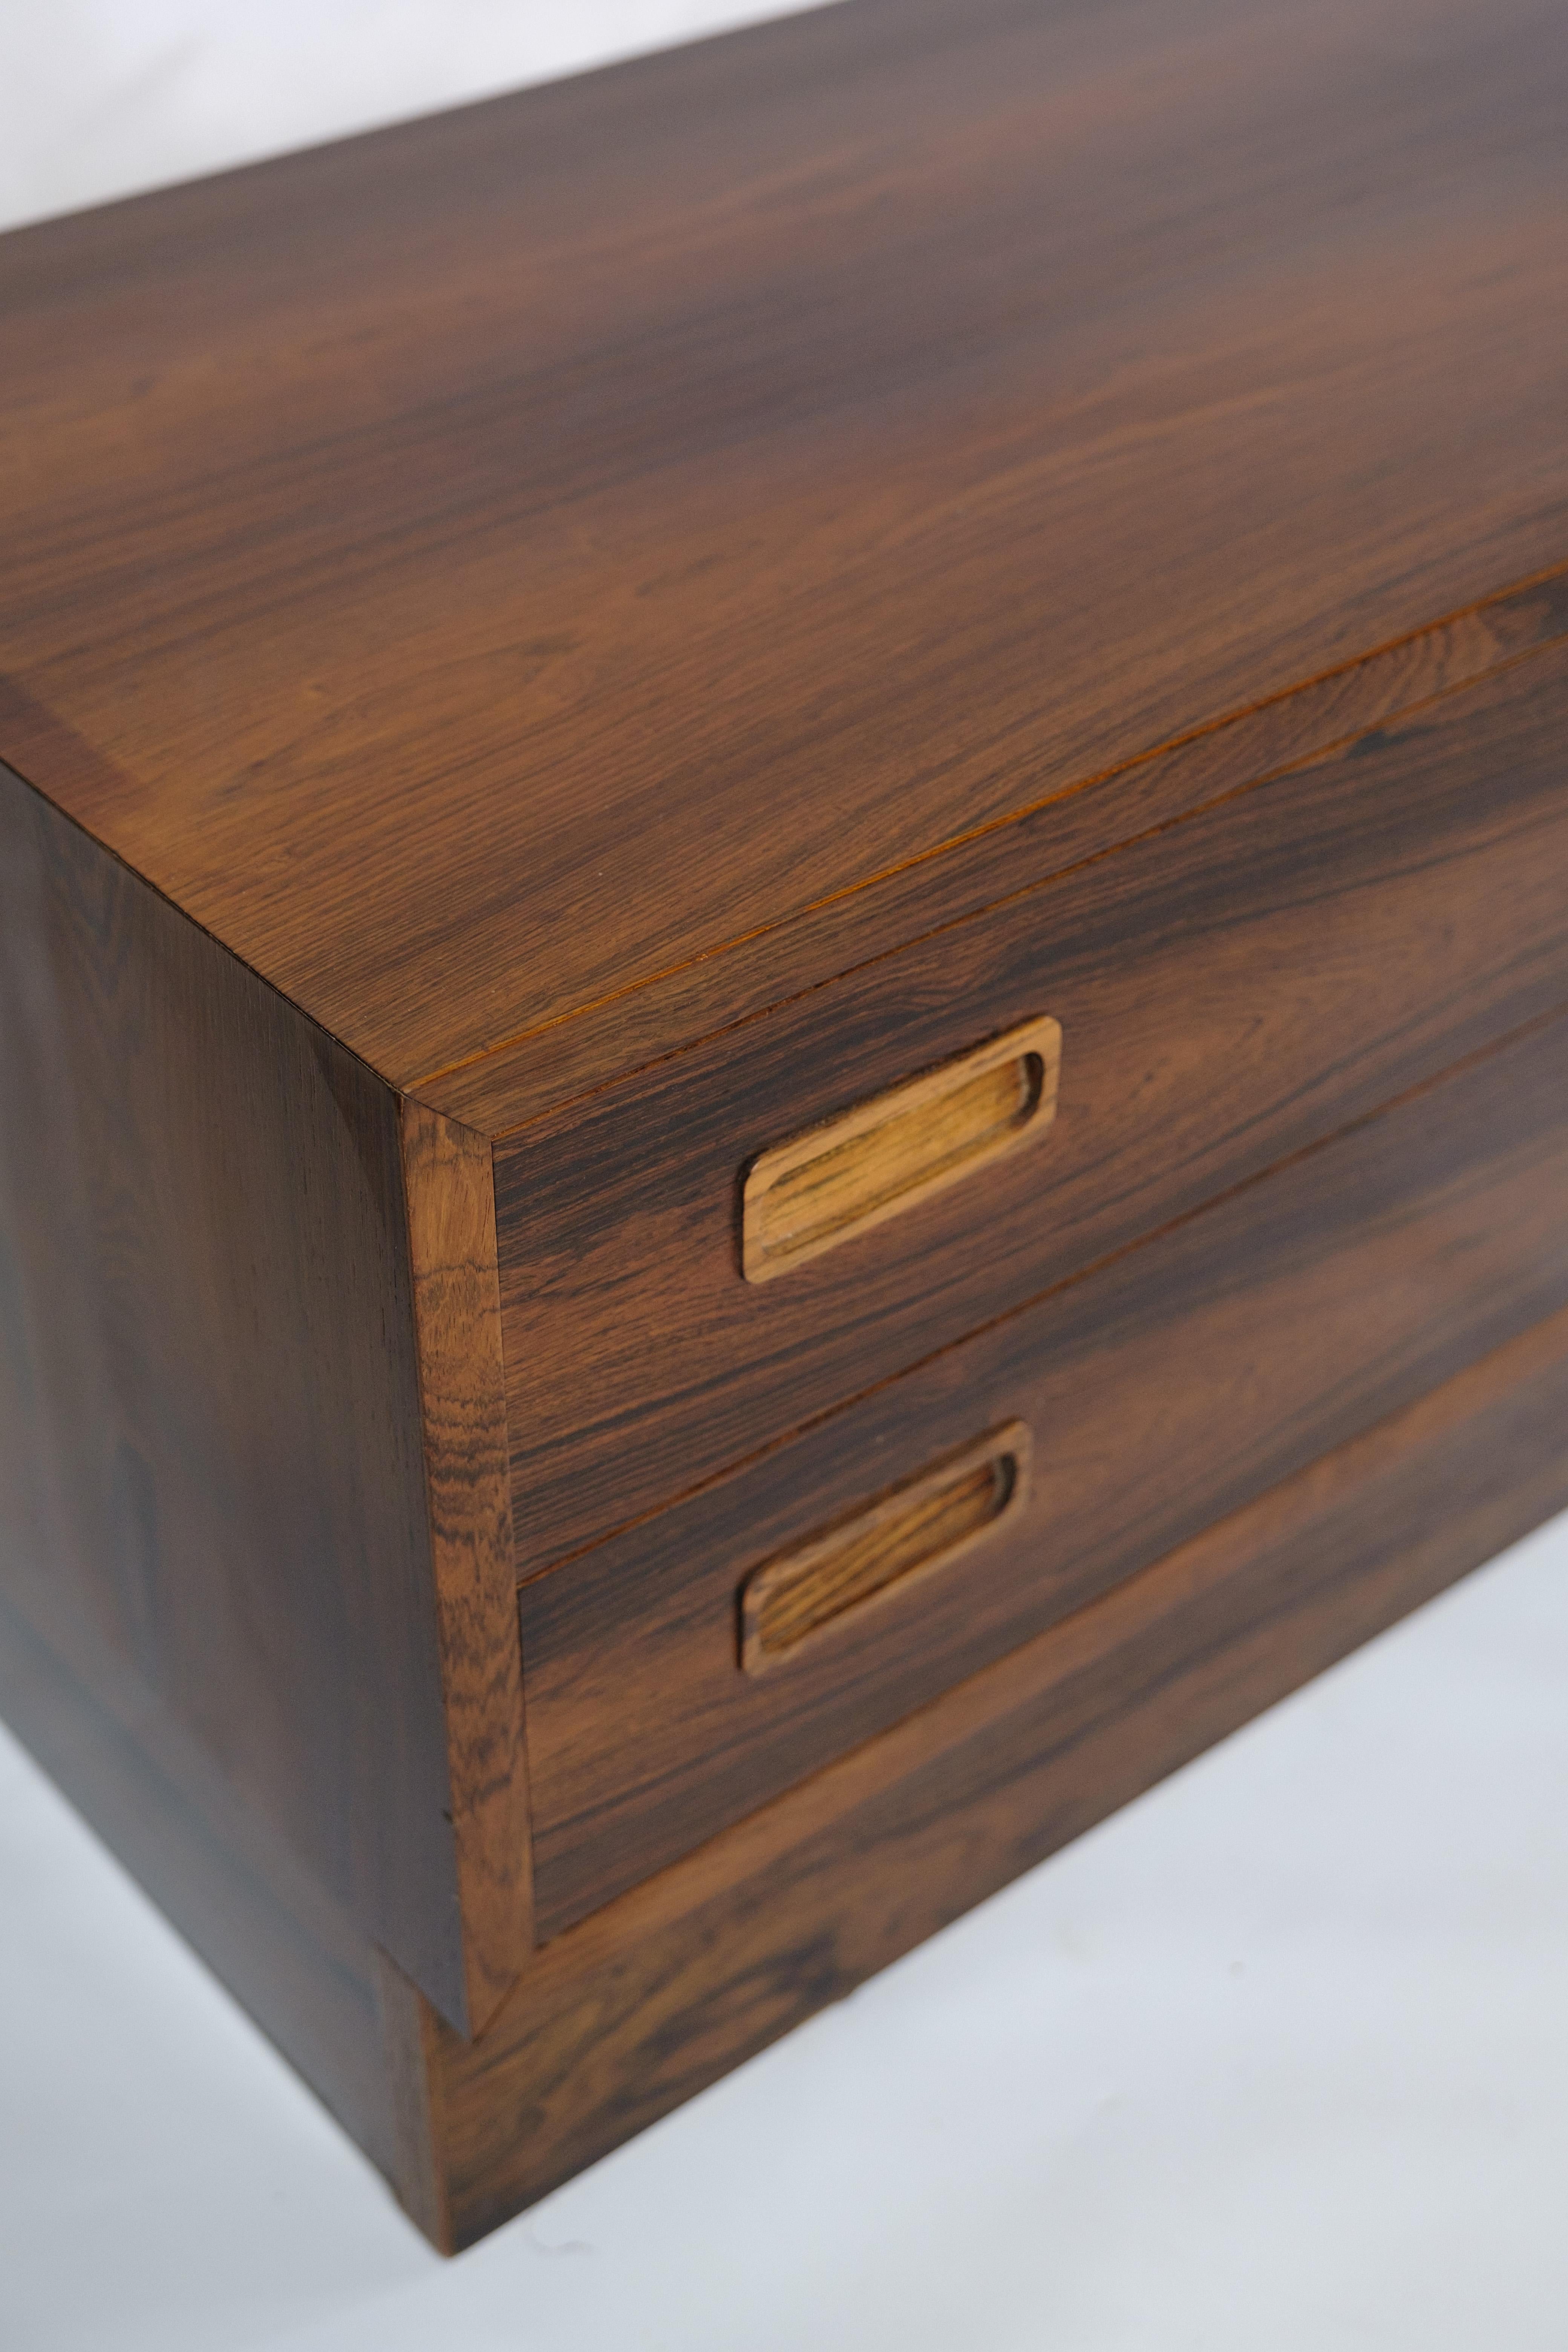 This chest of drawers is a brilliant example of Danish design from the 1960s, created by Hundevad Møbelfabrik. Crafted from rosewood, this chest of drawers exudes a timeless elegance and simplicity that fits perfectly with any decor.

Hundevad